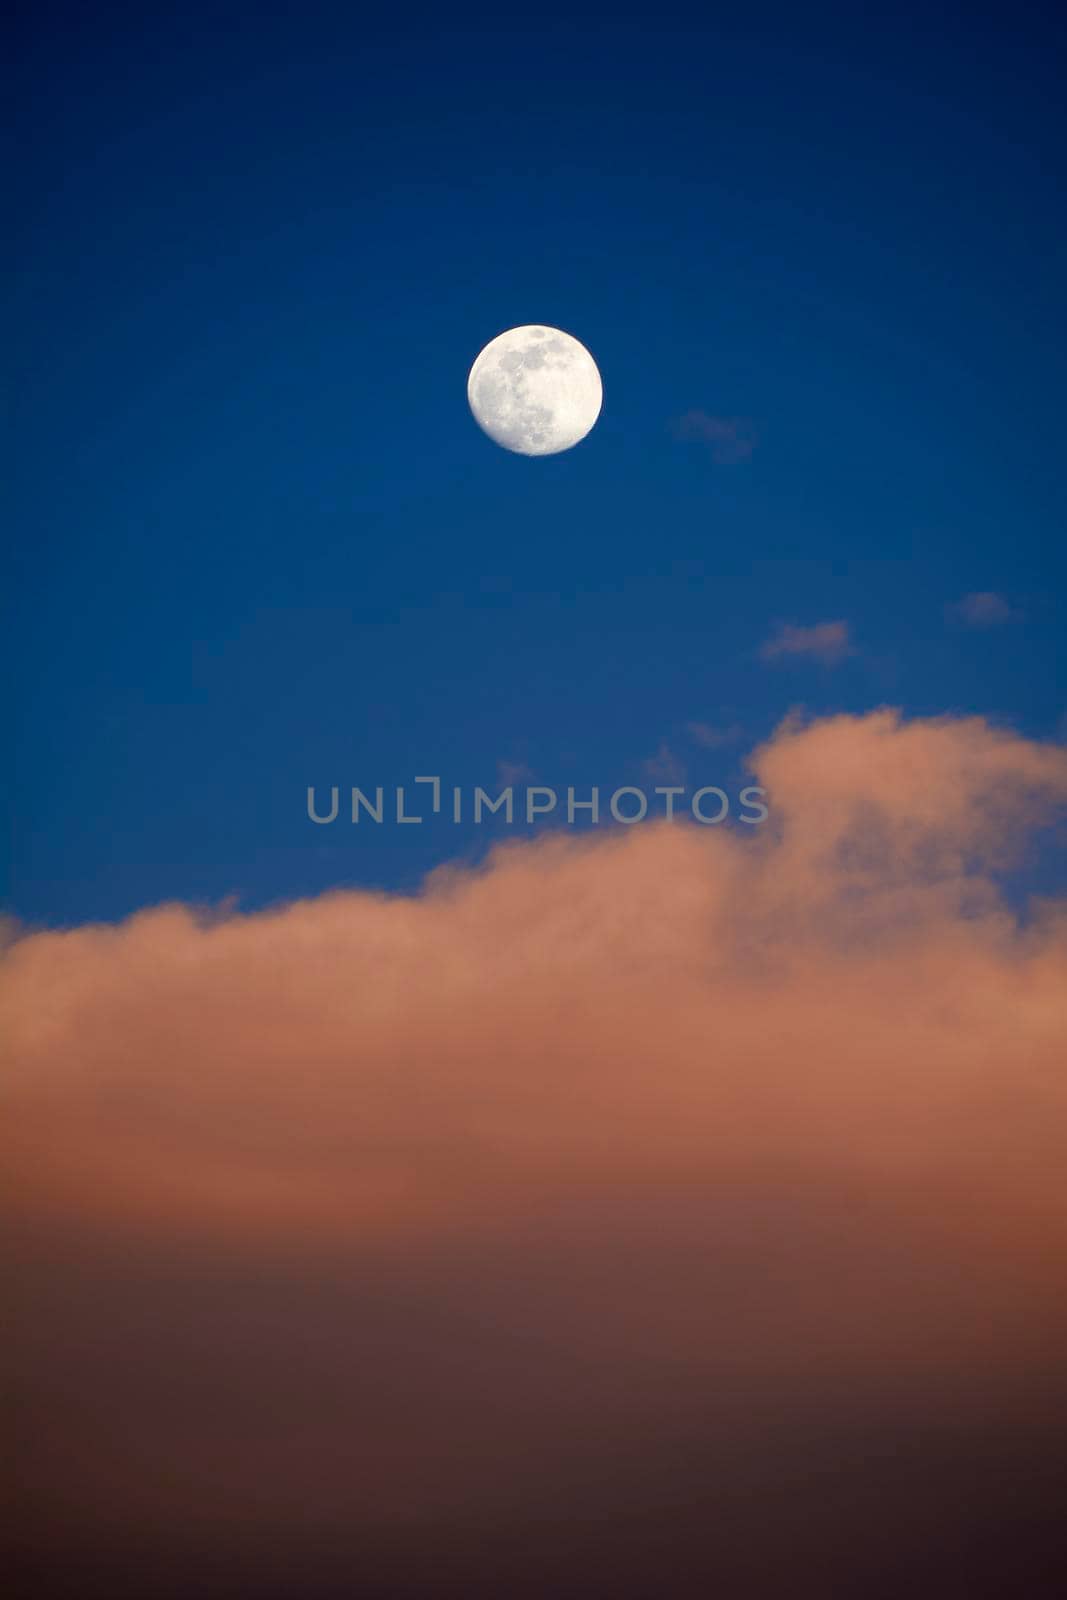 Moon in blue sky with white clouds by raul_ruiz